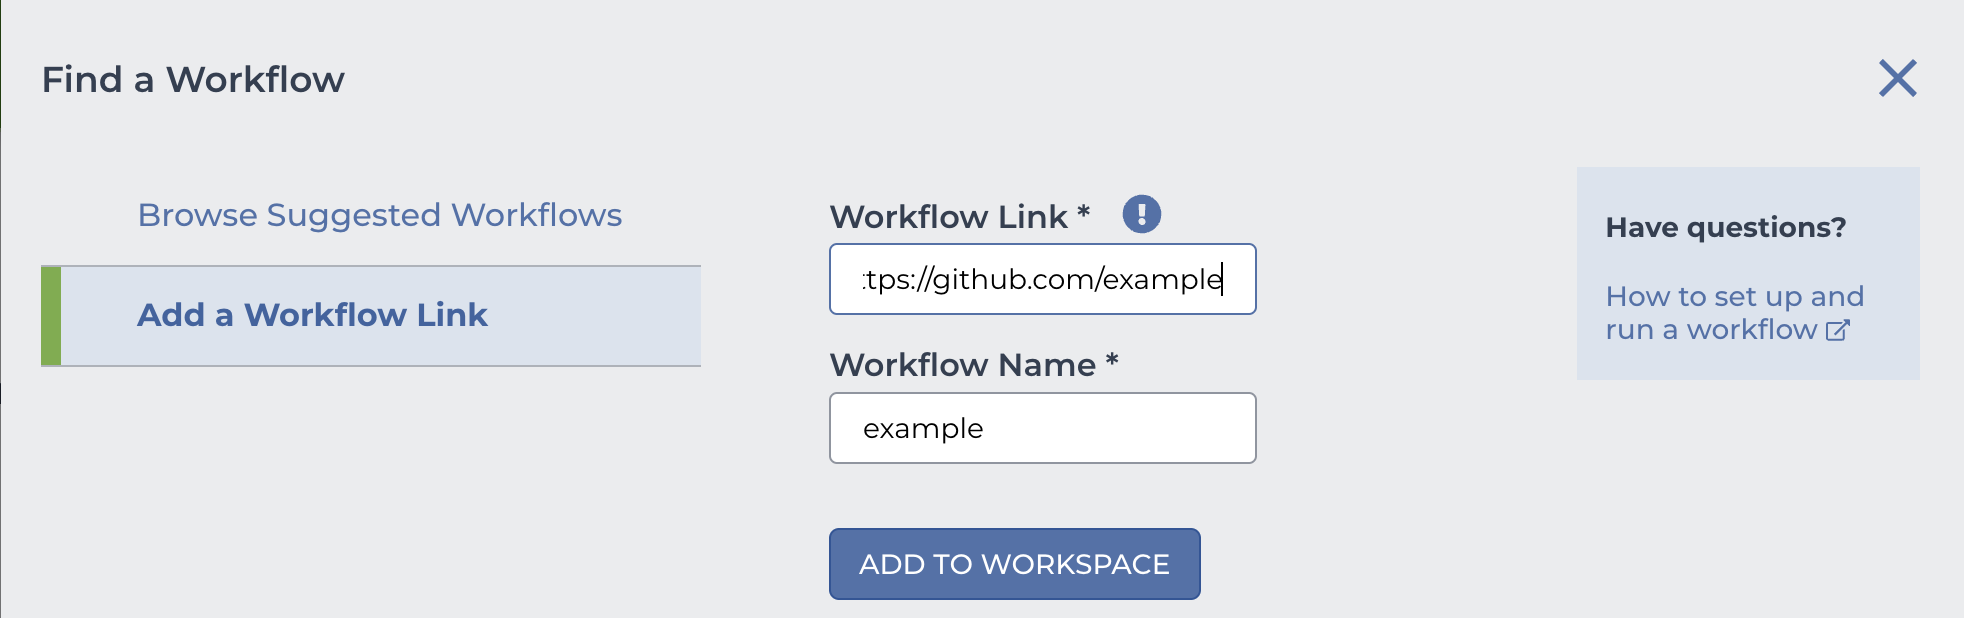 ToA_Find-a-workflow_Add-a-workflow-link_Screenshot.png